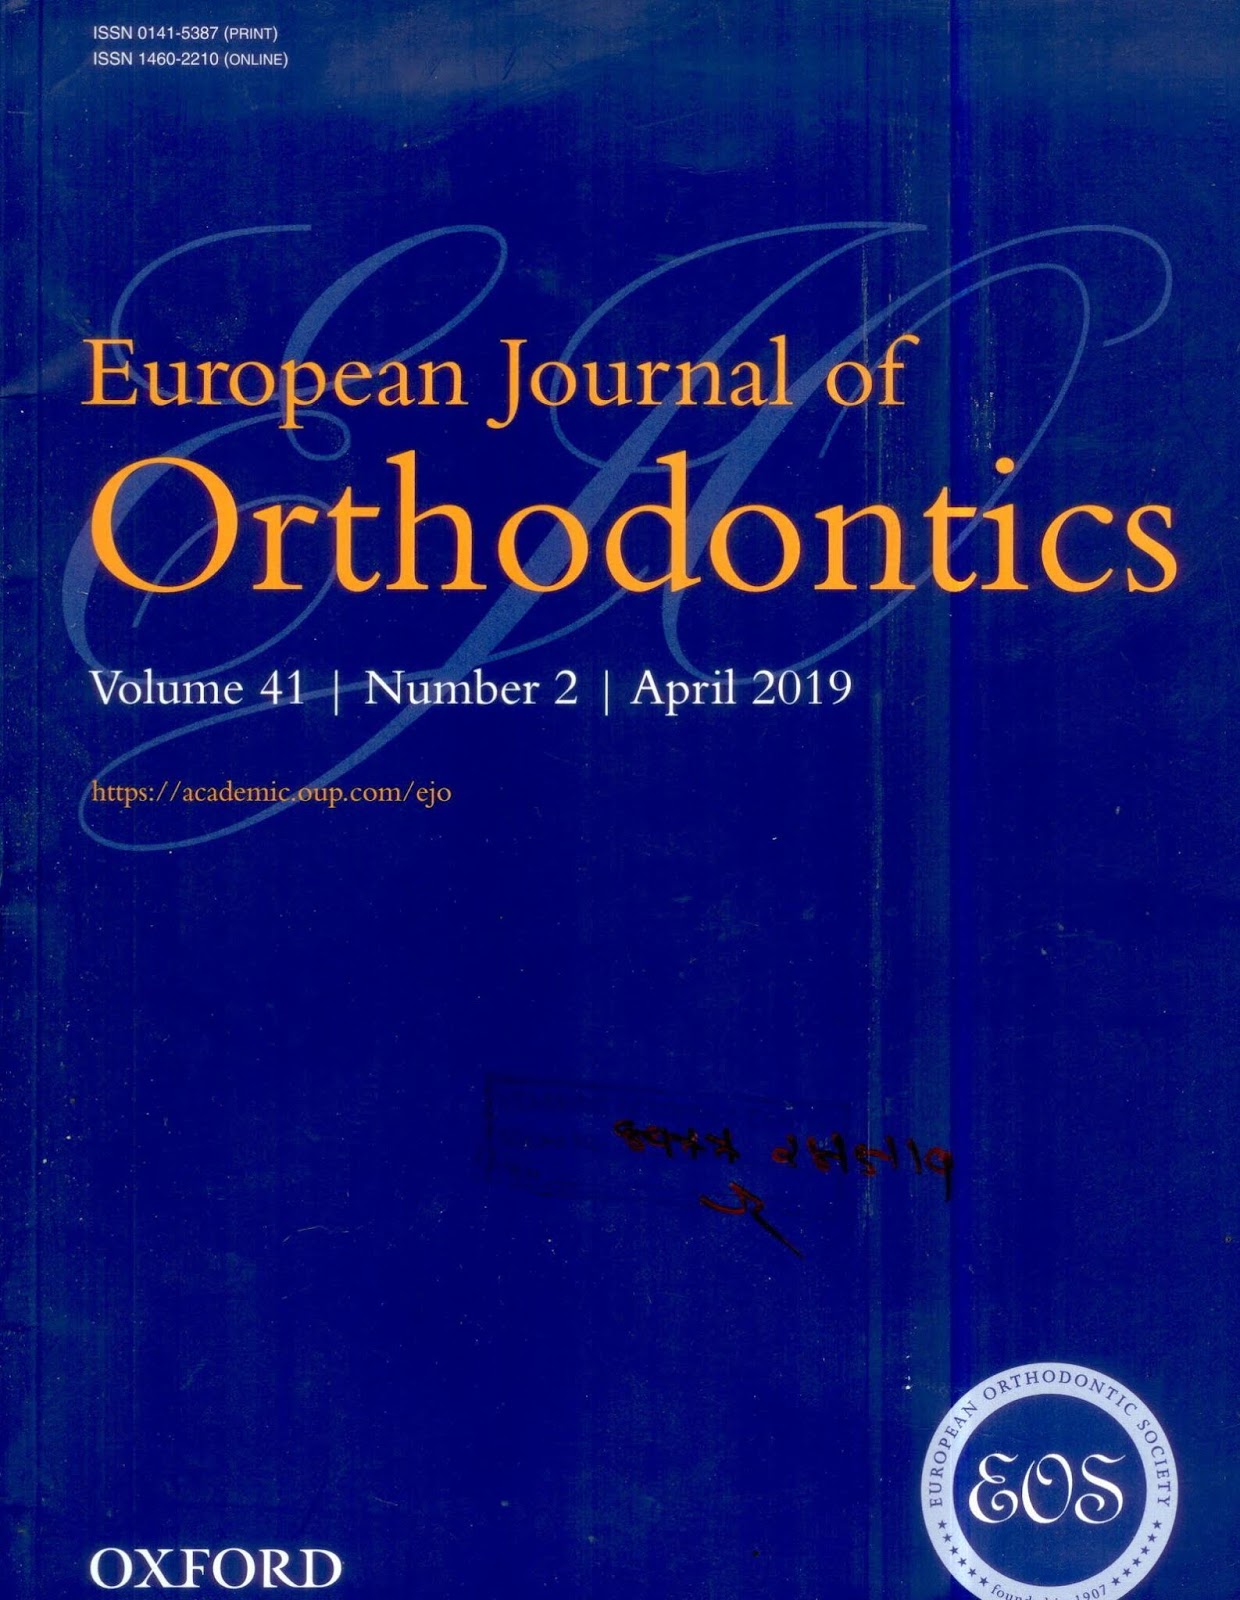 https://academic.oup.com/ejo/issue/41/2?browseBy=volume